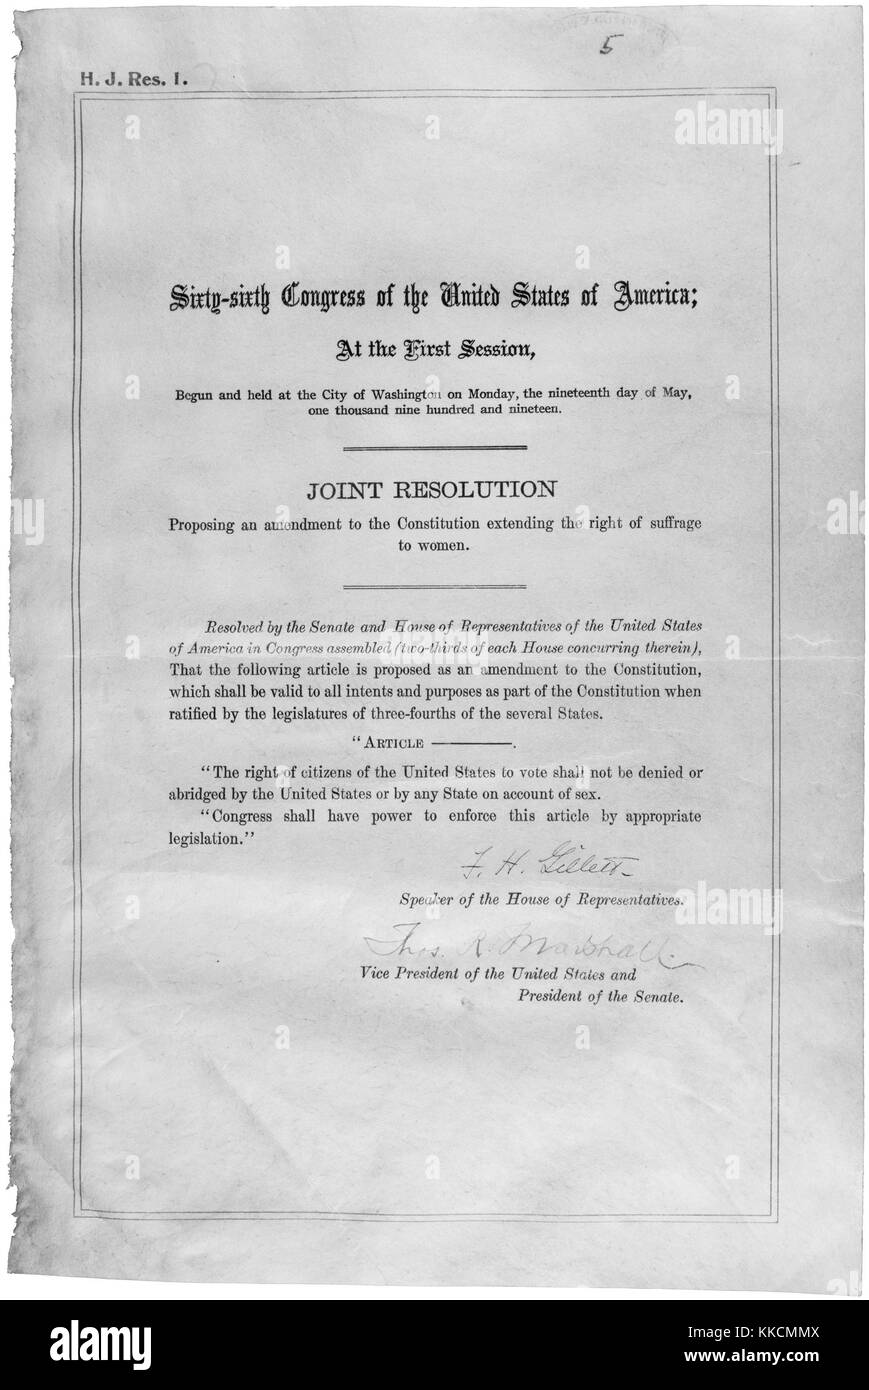 Original paper from congressional session ratifying the Nineteenth Amendment to the United States Constitution, granting women the right to vote. Image courtesy National Archives. 1919. Stock Photo